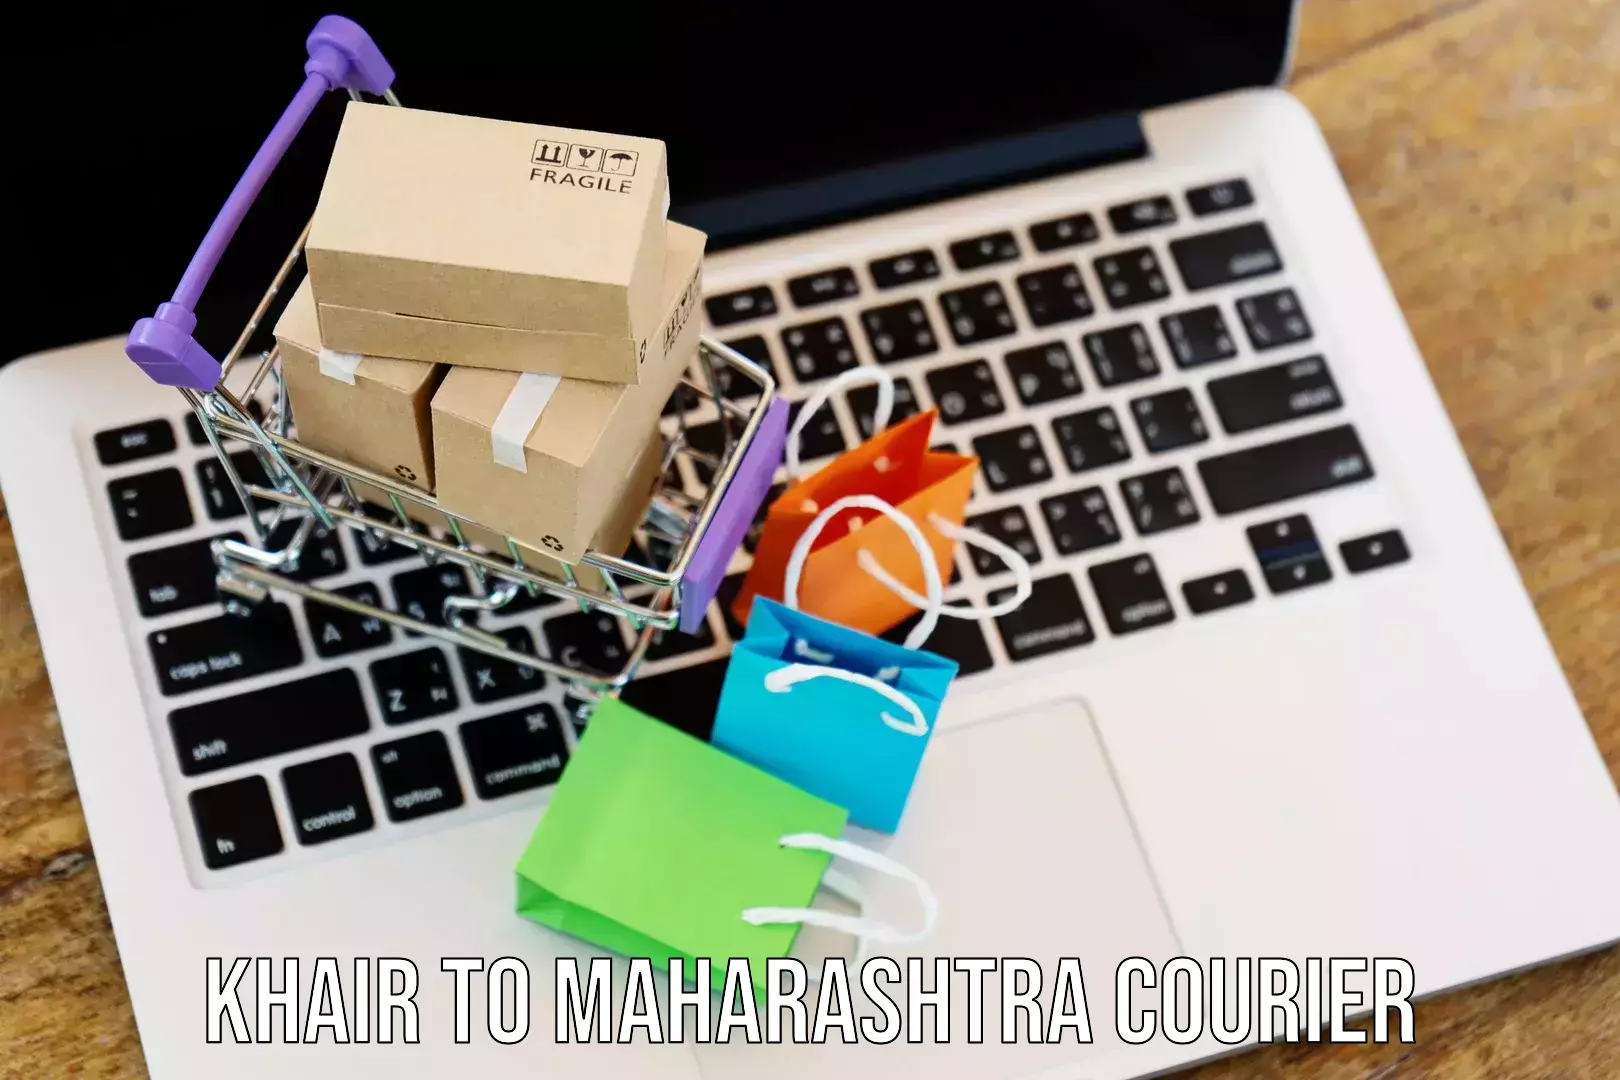 Reliable delivery network Khair to Maharashtra